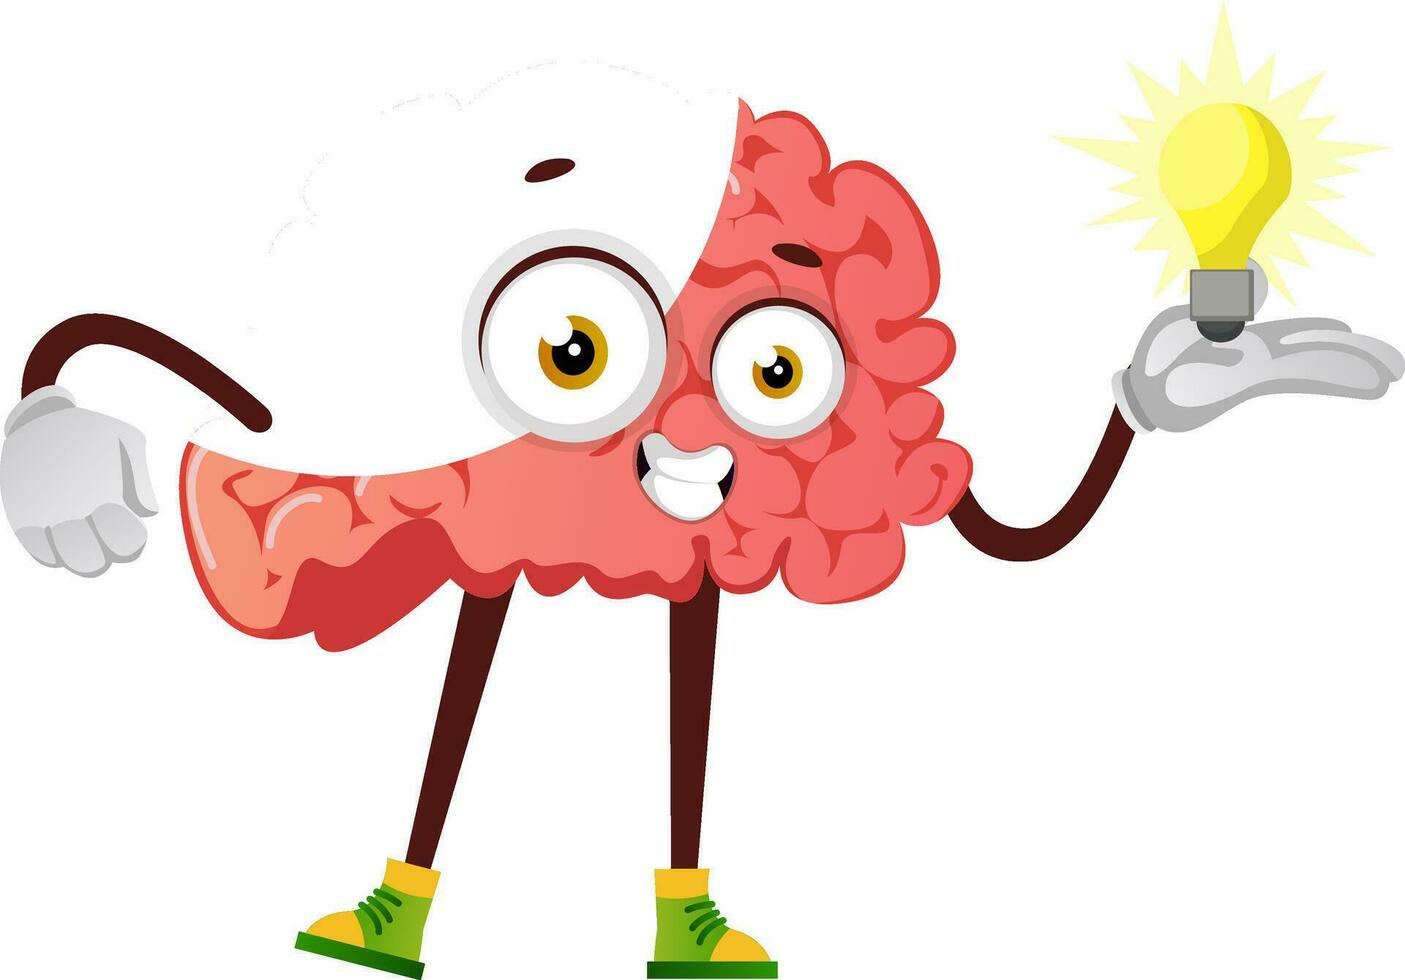 Brain has a great idea, illustration, vector on white background.